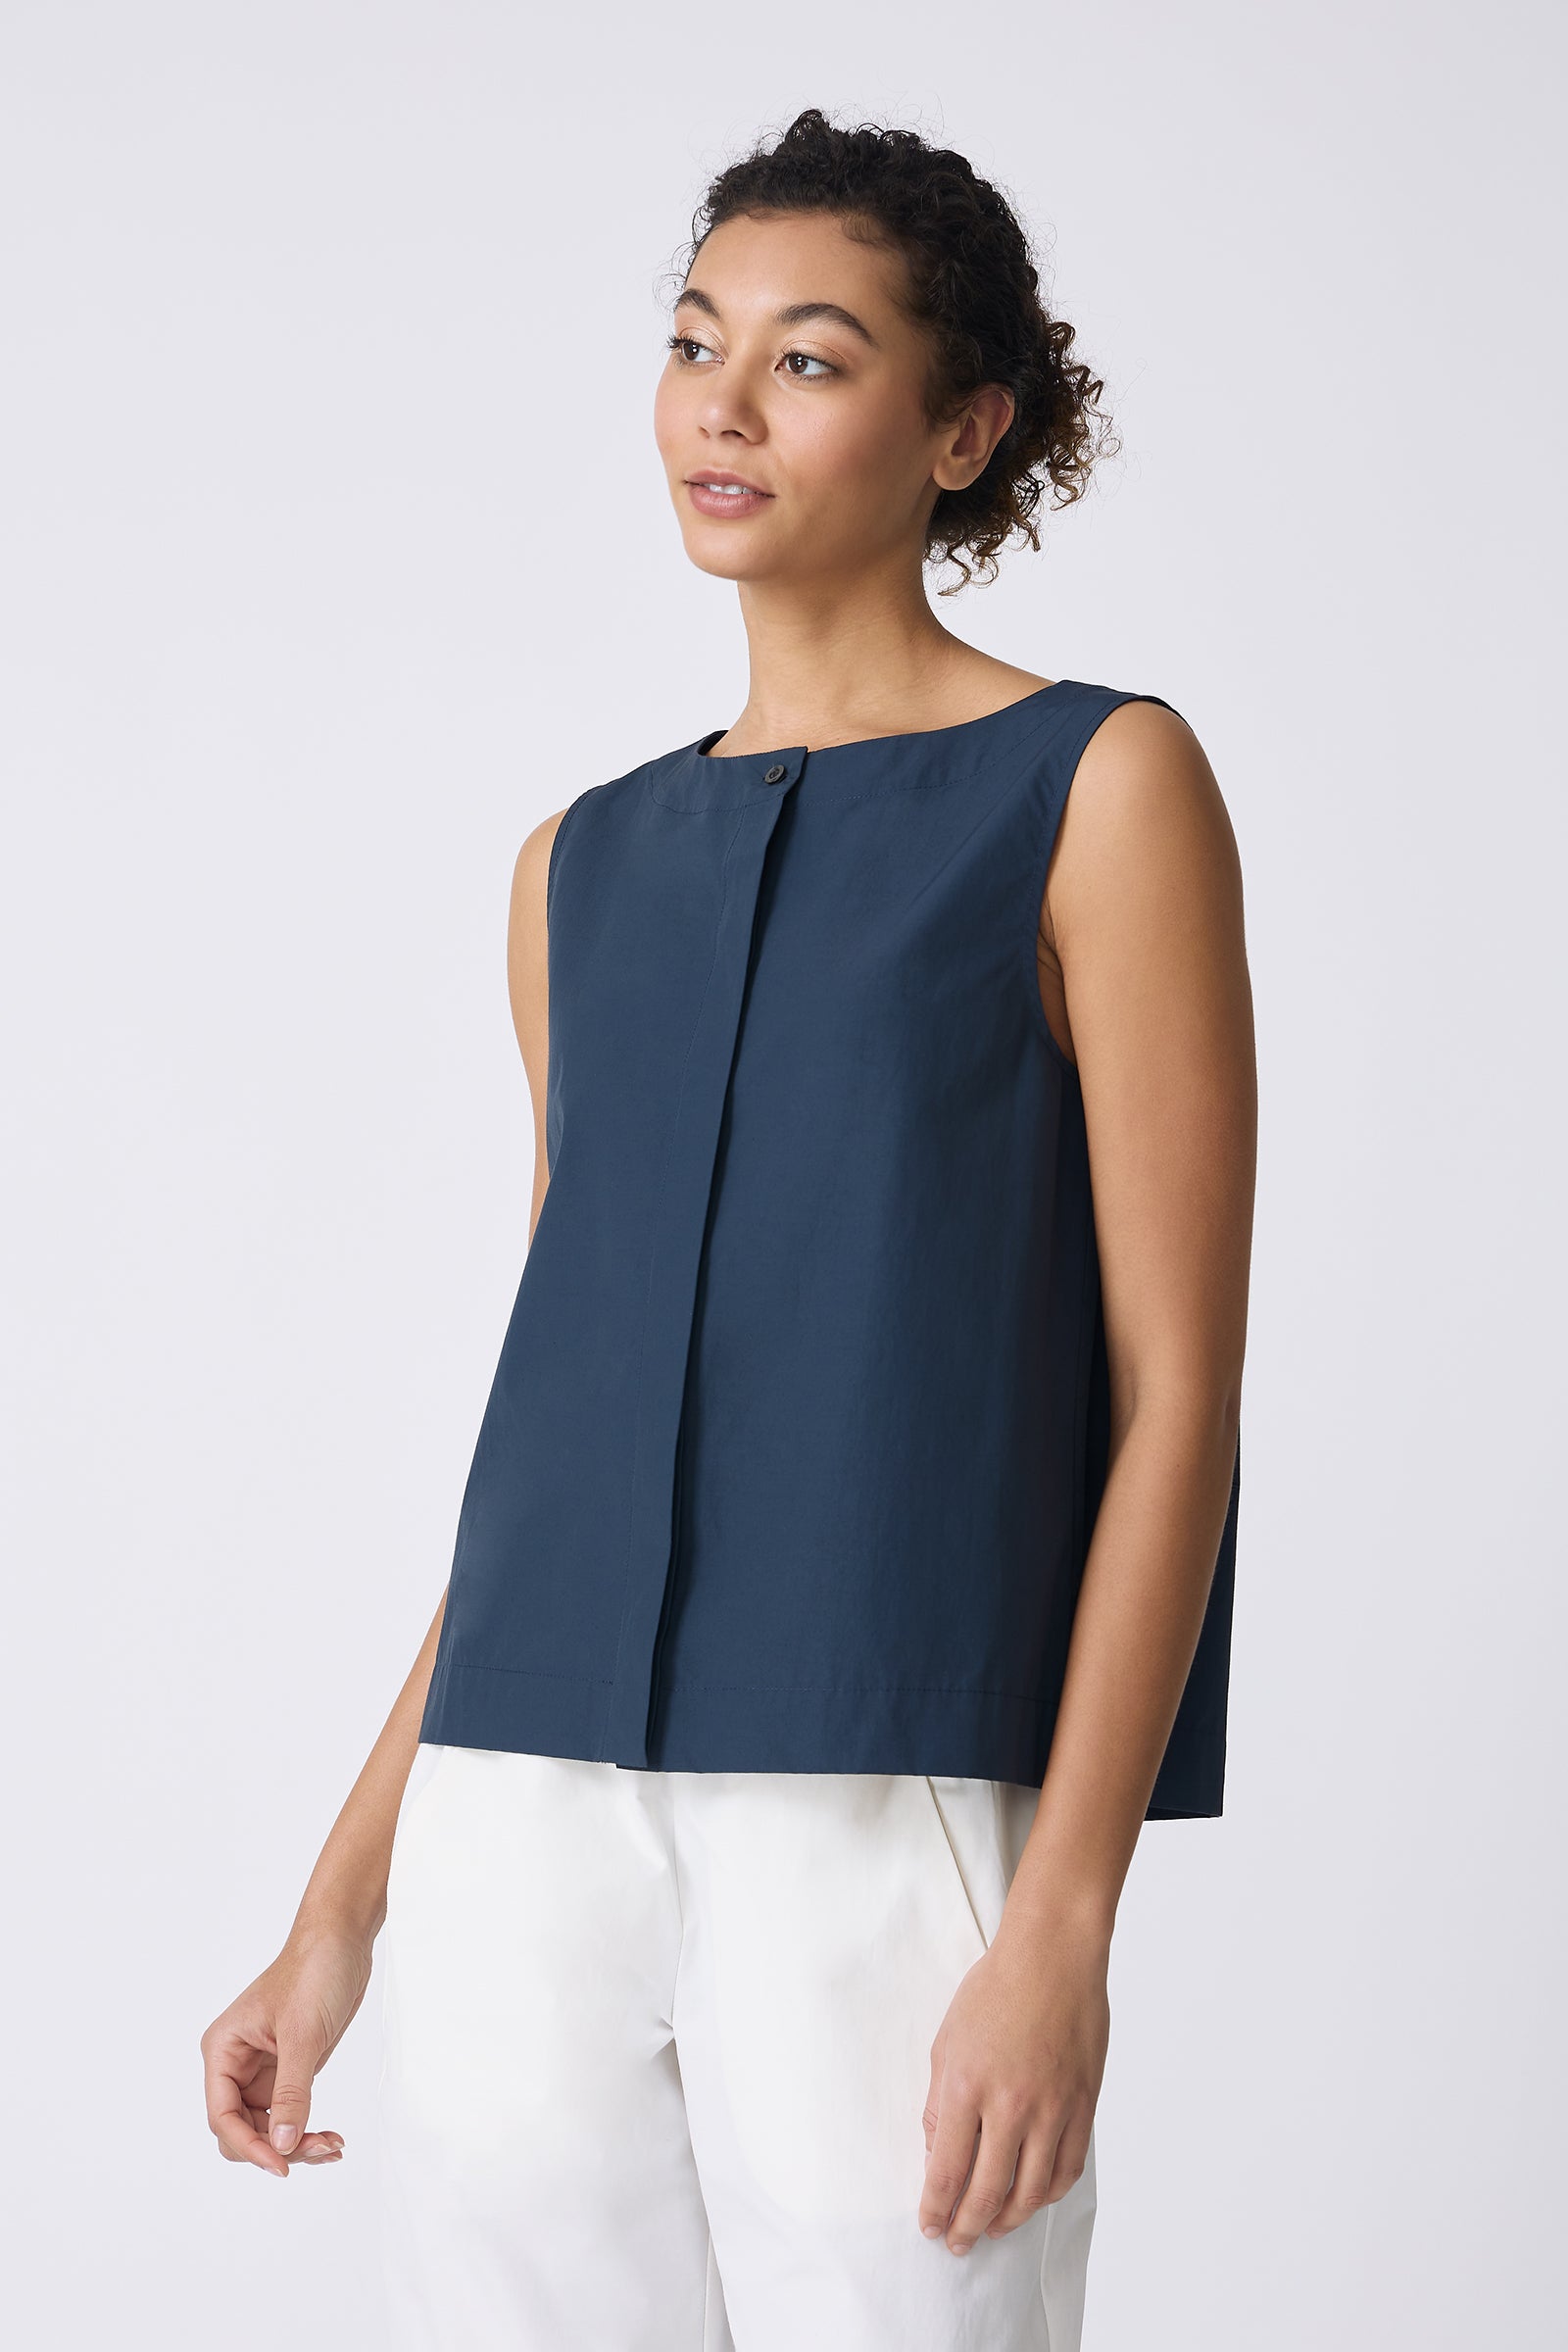 Kal Rieman Colette Shell in Summer Navy on model front view